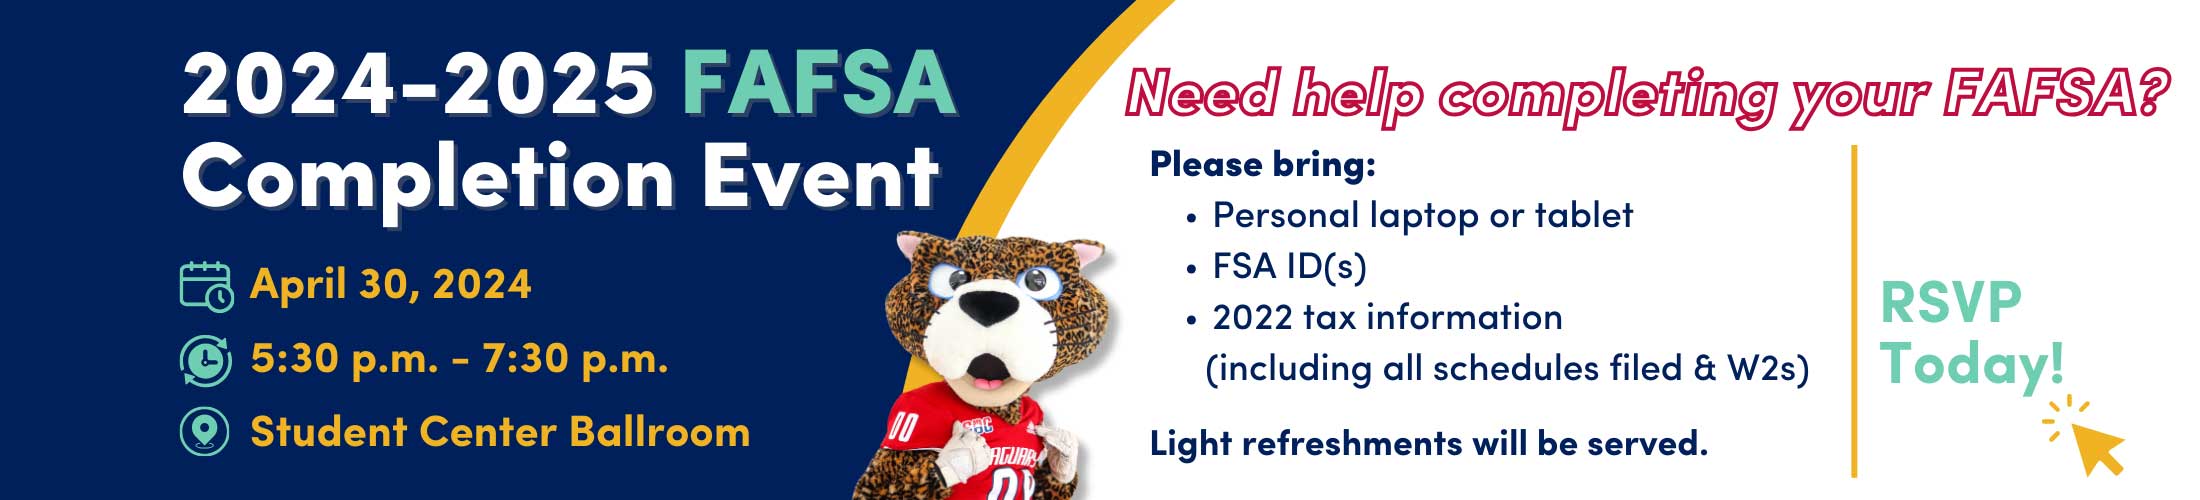 2024-2025 FAFSA Completion Event April 30, 2024 5:30 pm - 7:30 pm Student Center Ballroom